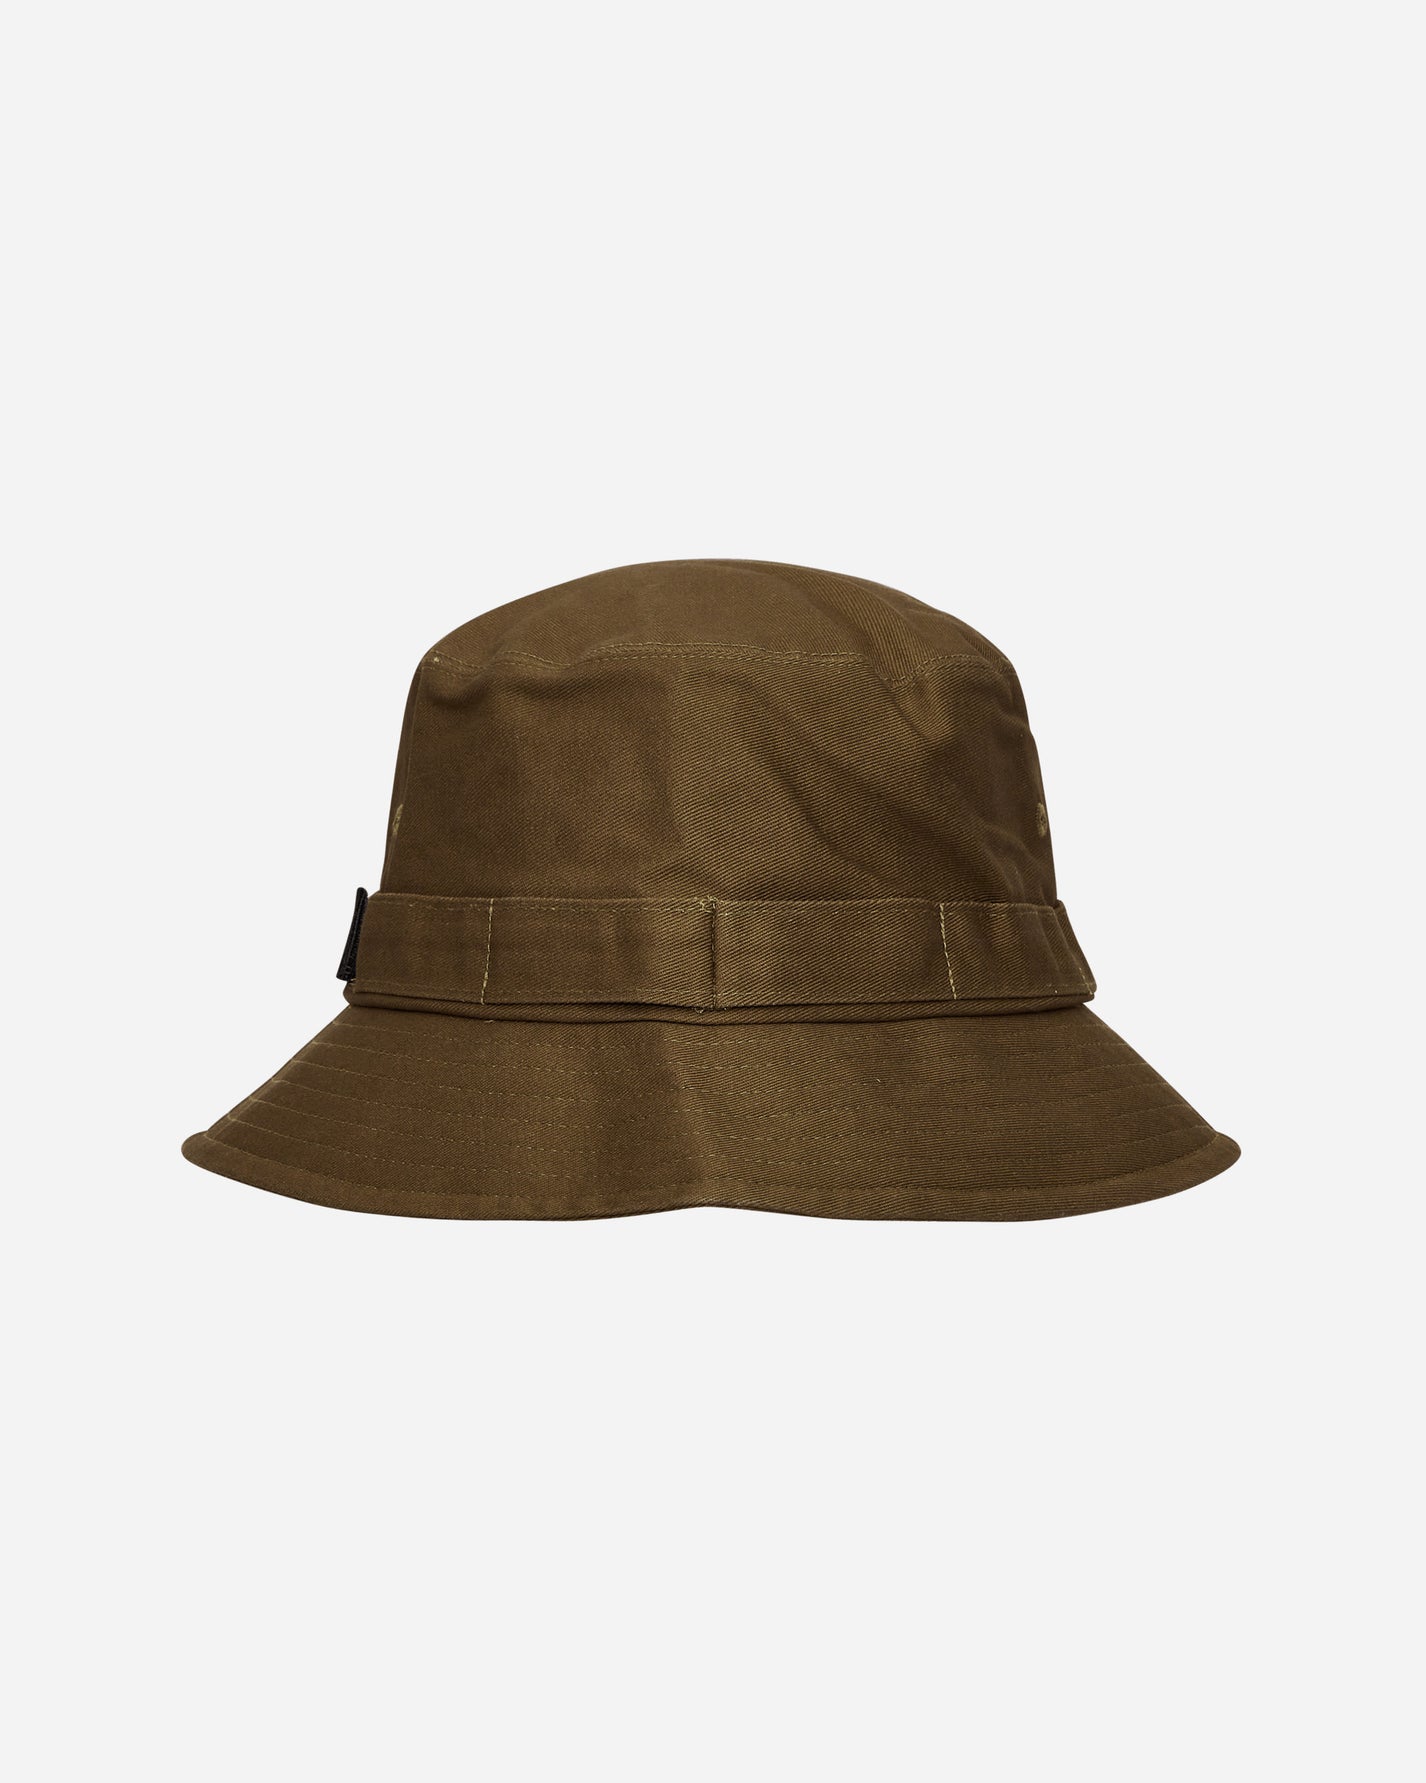 Wild Things Wt Hat Olive Hats Bucket WT222-20 OLIVE